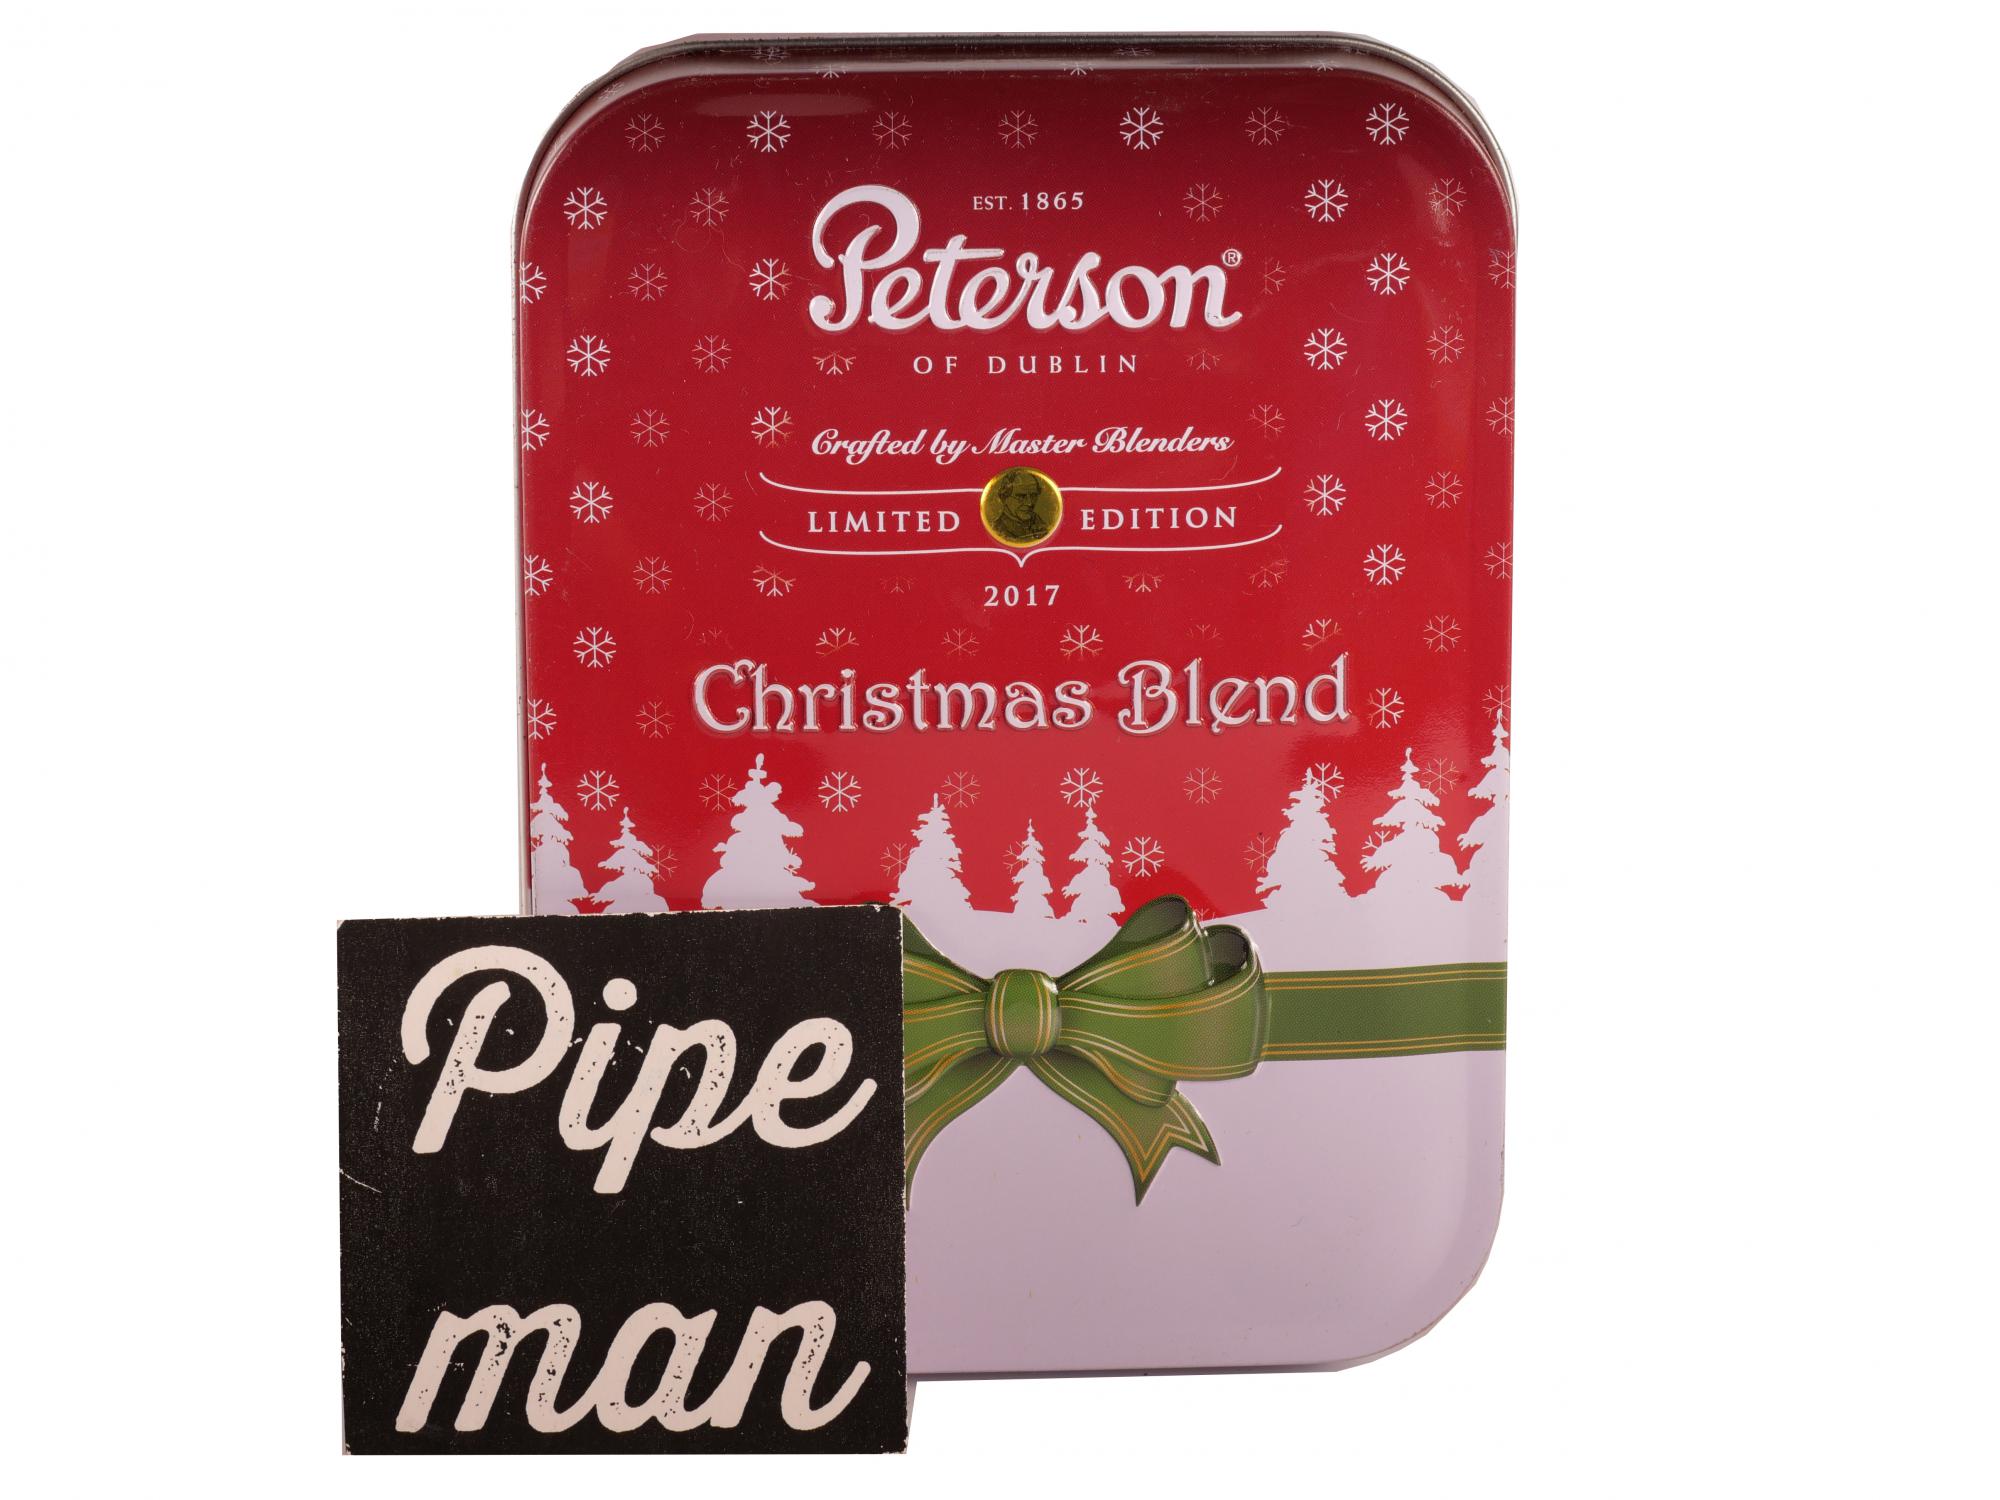 Peterson Christmas Blend 2017 Limited Edition